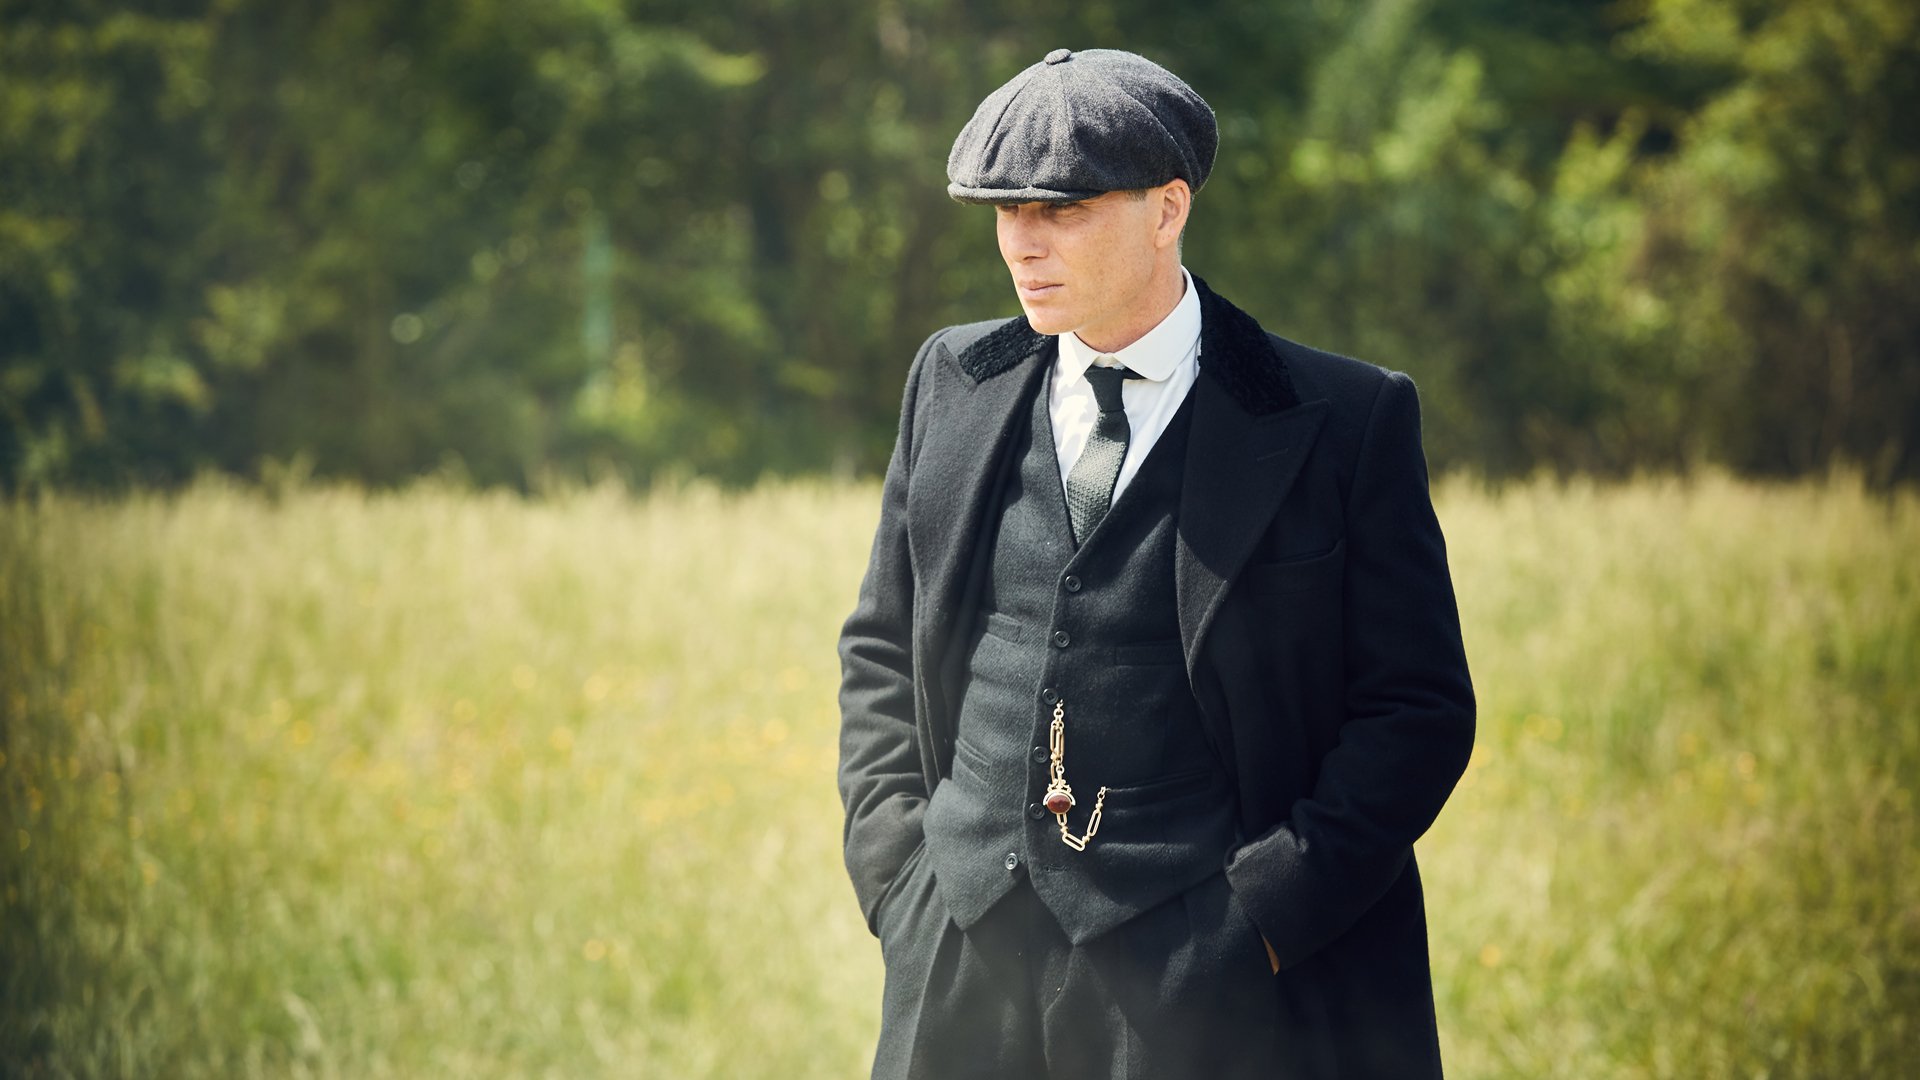 A man in a three piece suit stands in a field.